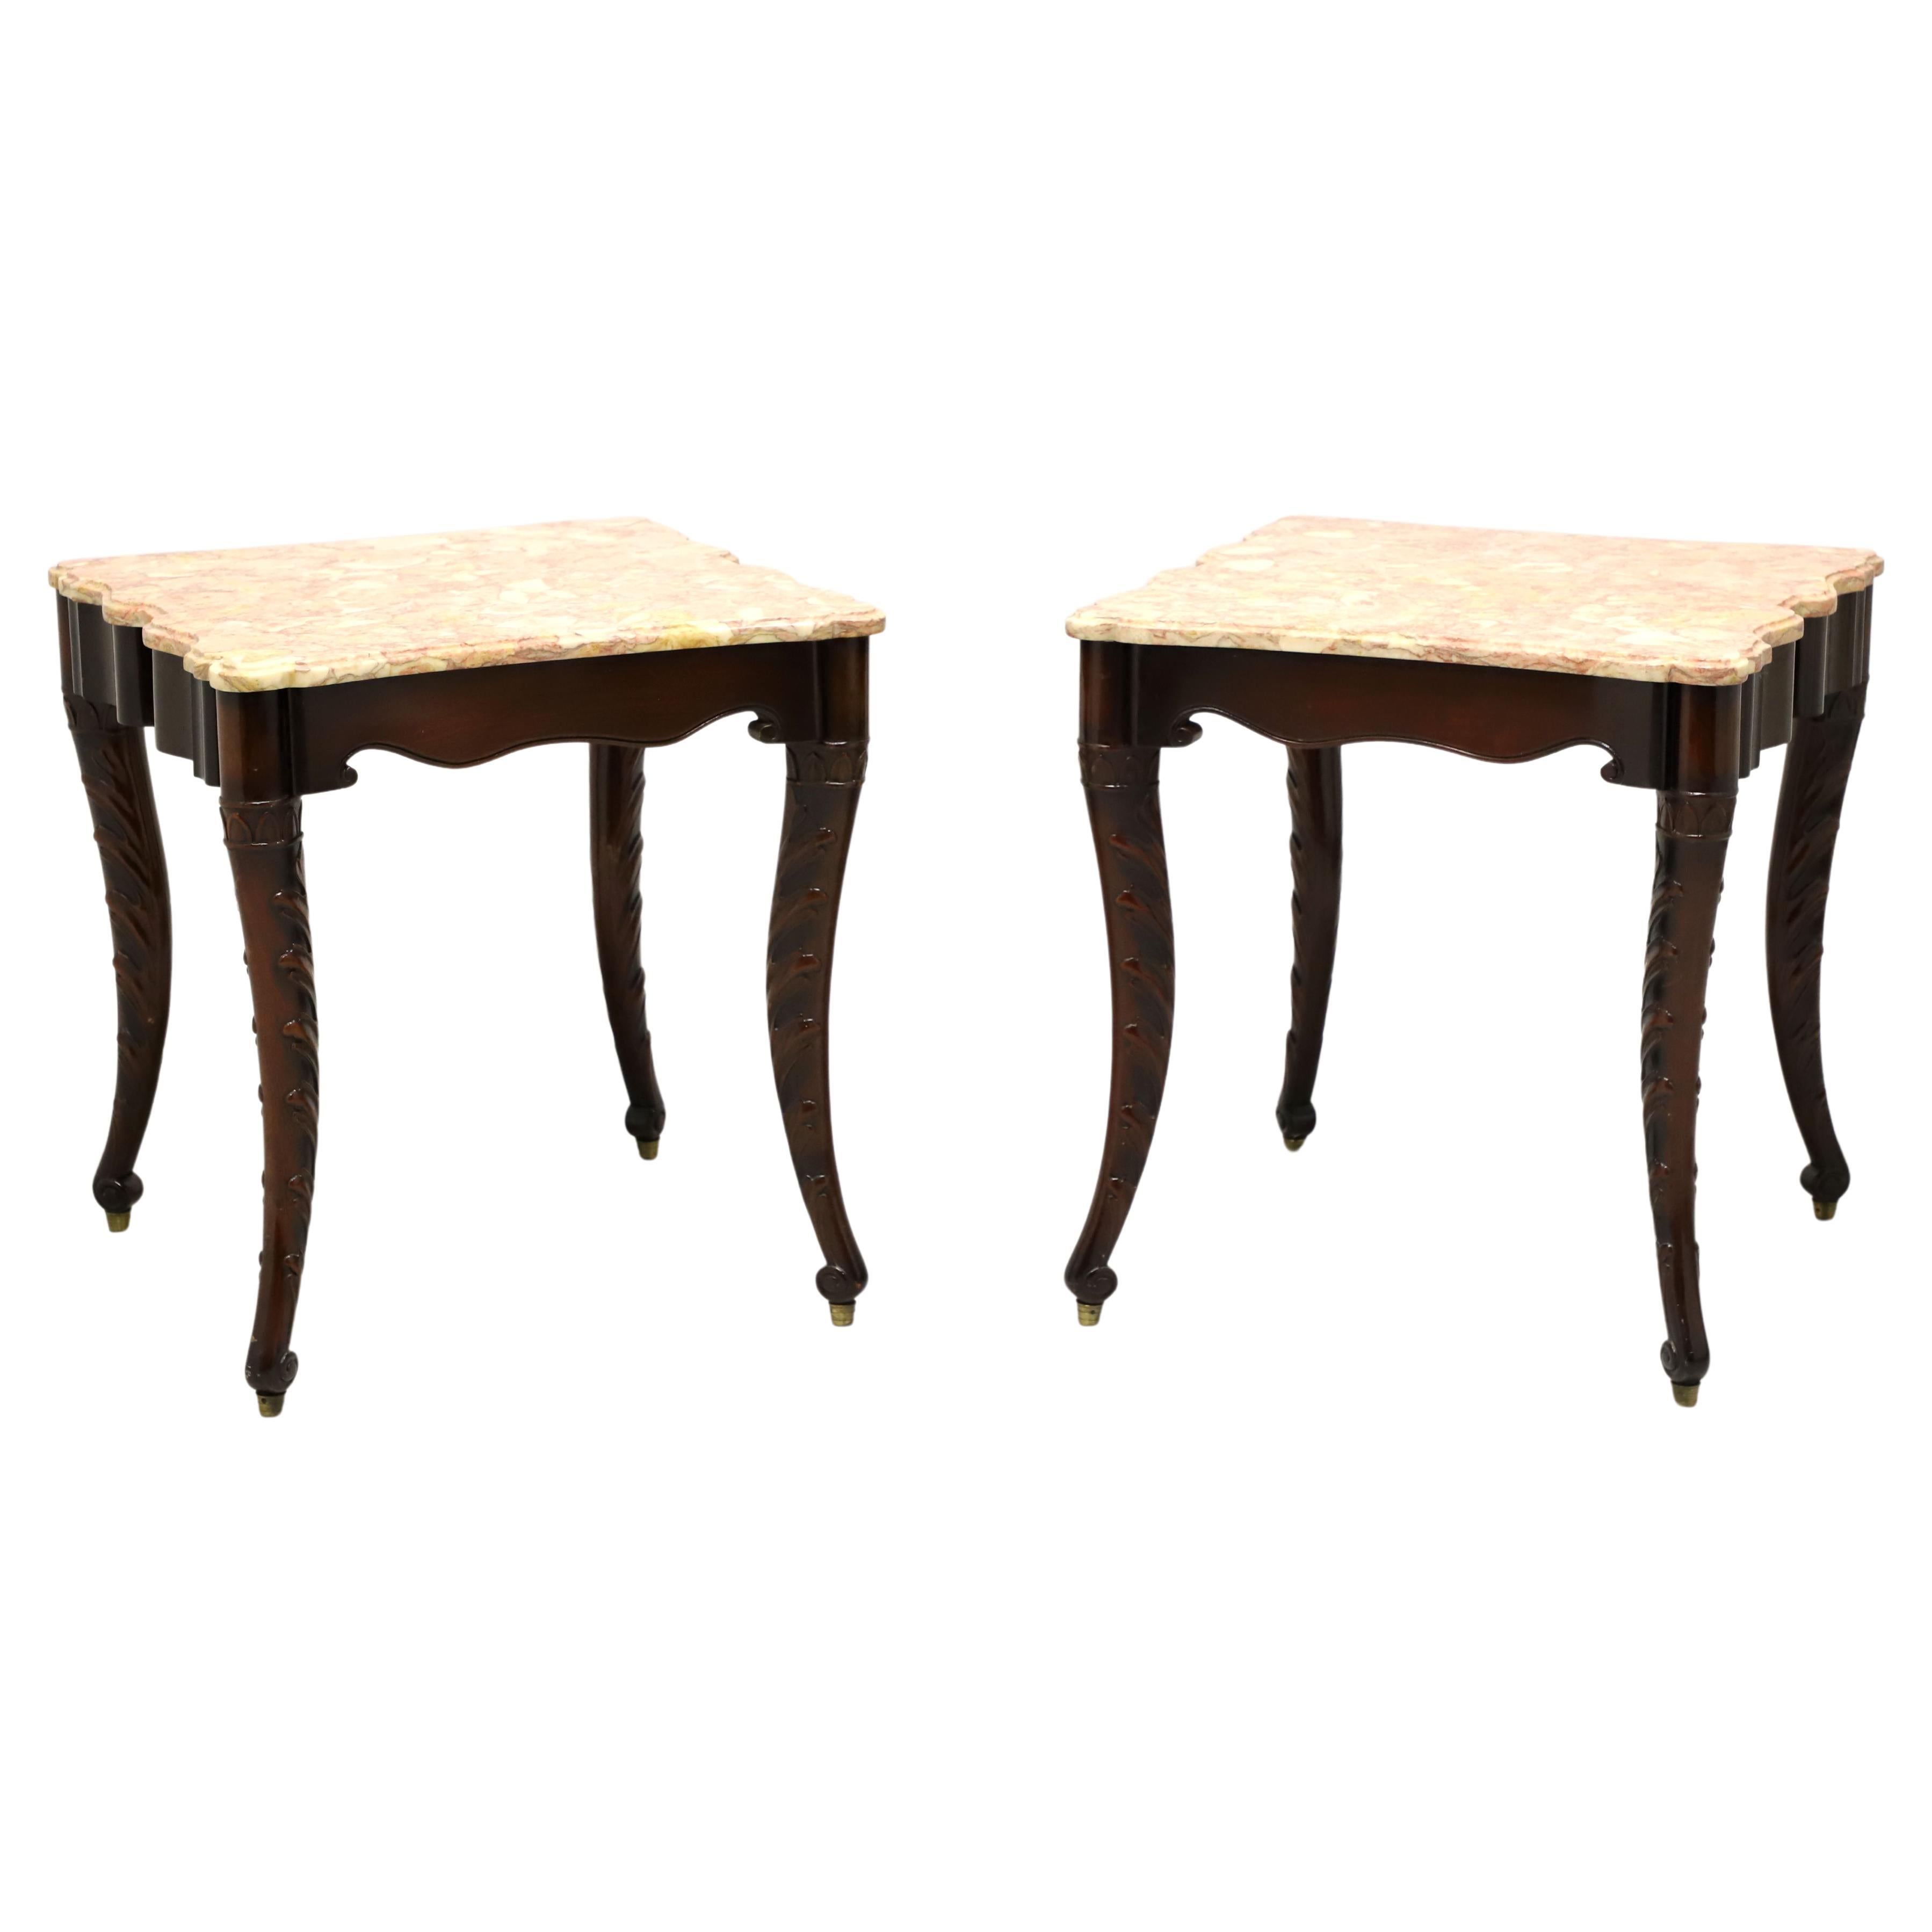 Mid 20th Century Carved Mahogany Marble Top Regency Large Side Tables - Pair